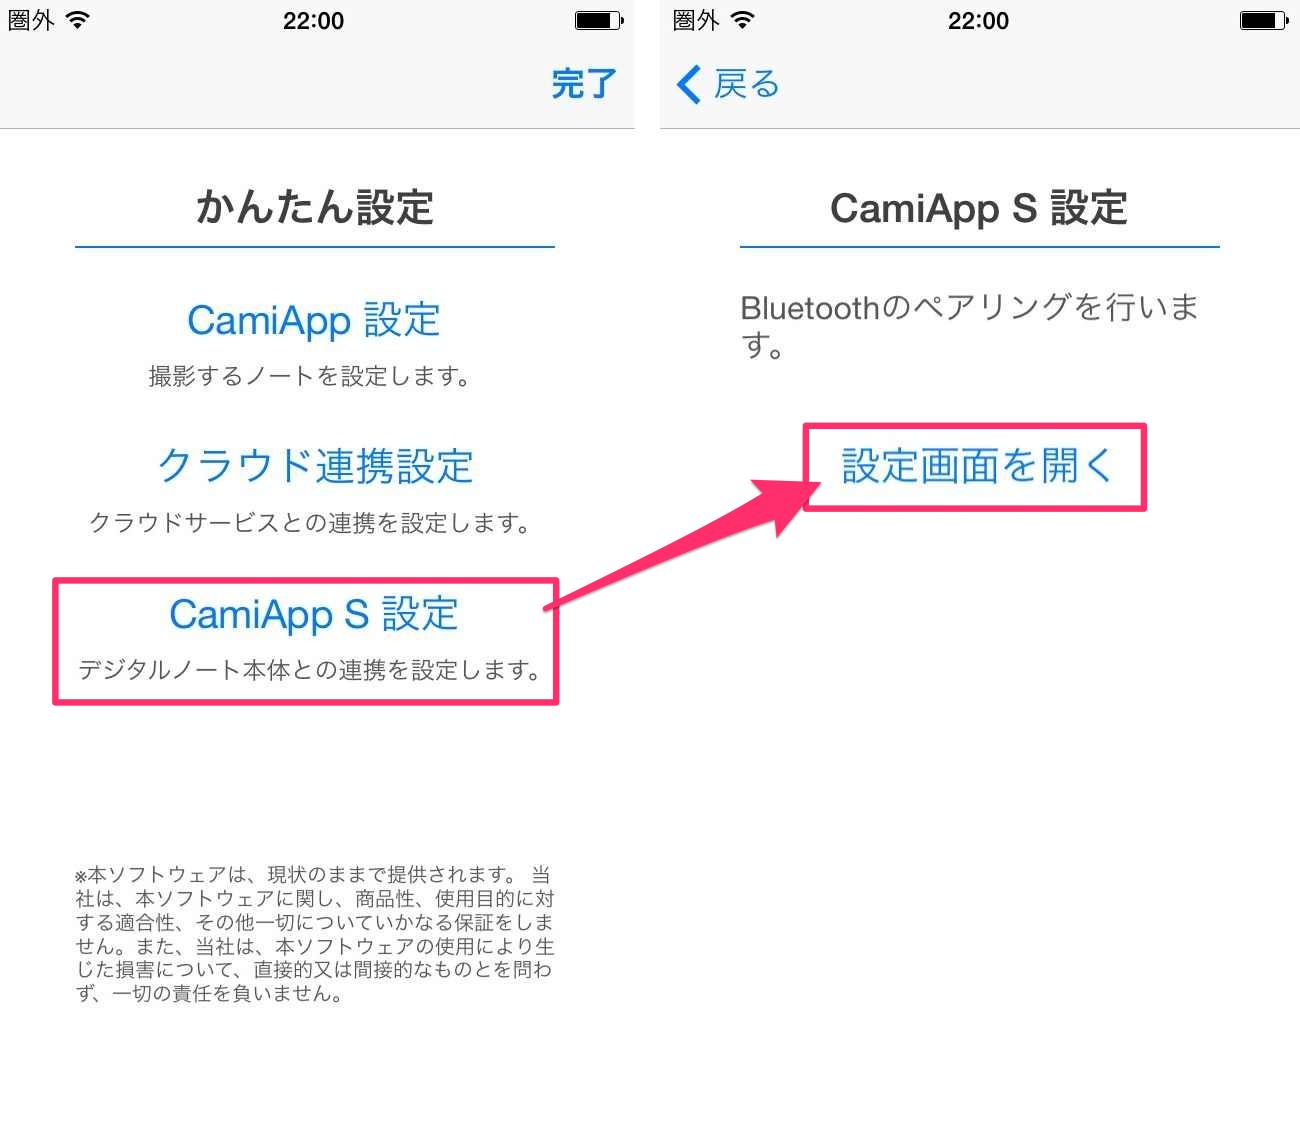 Camiapp s first impression review 08